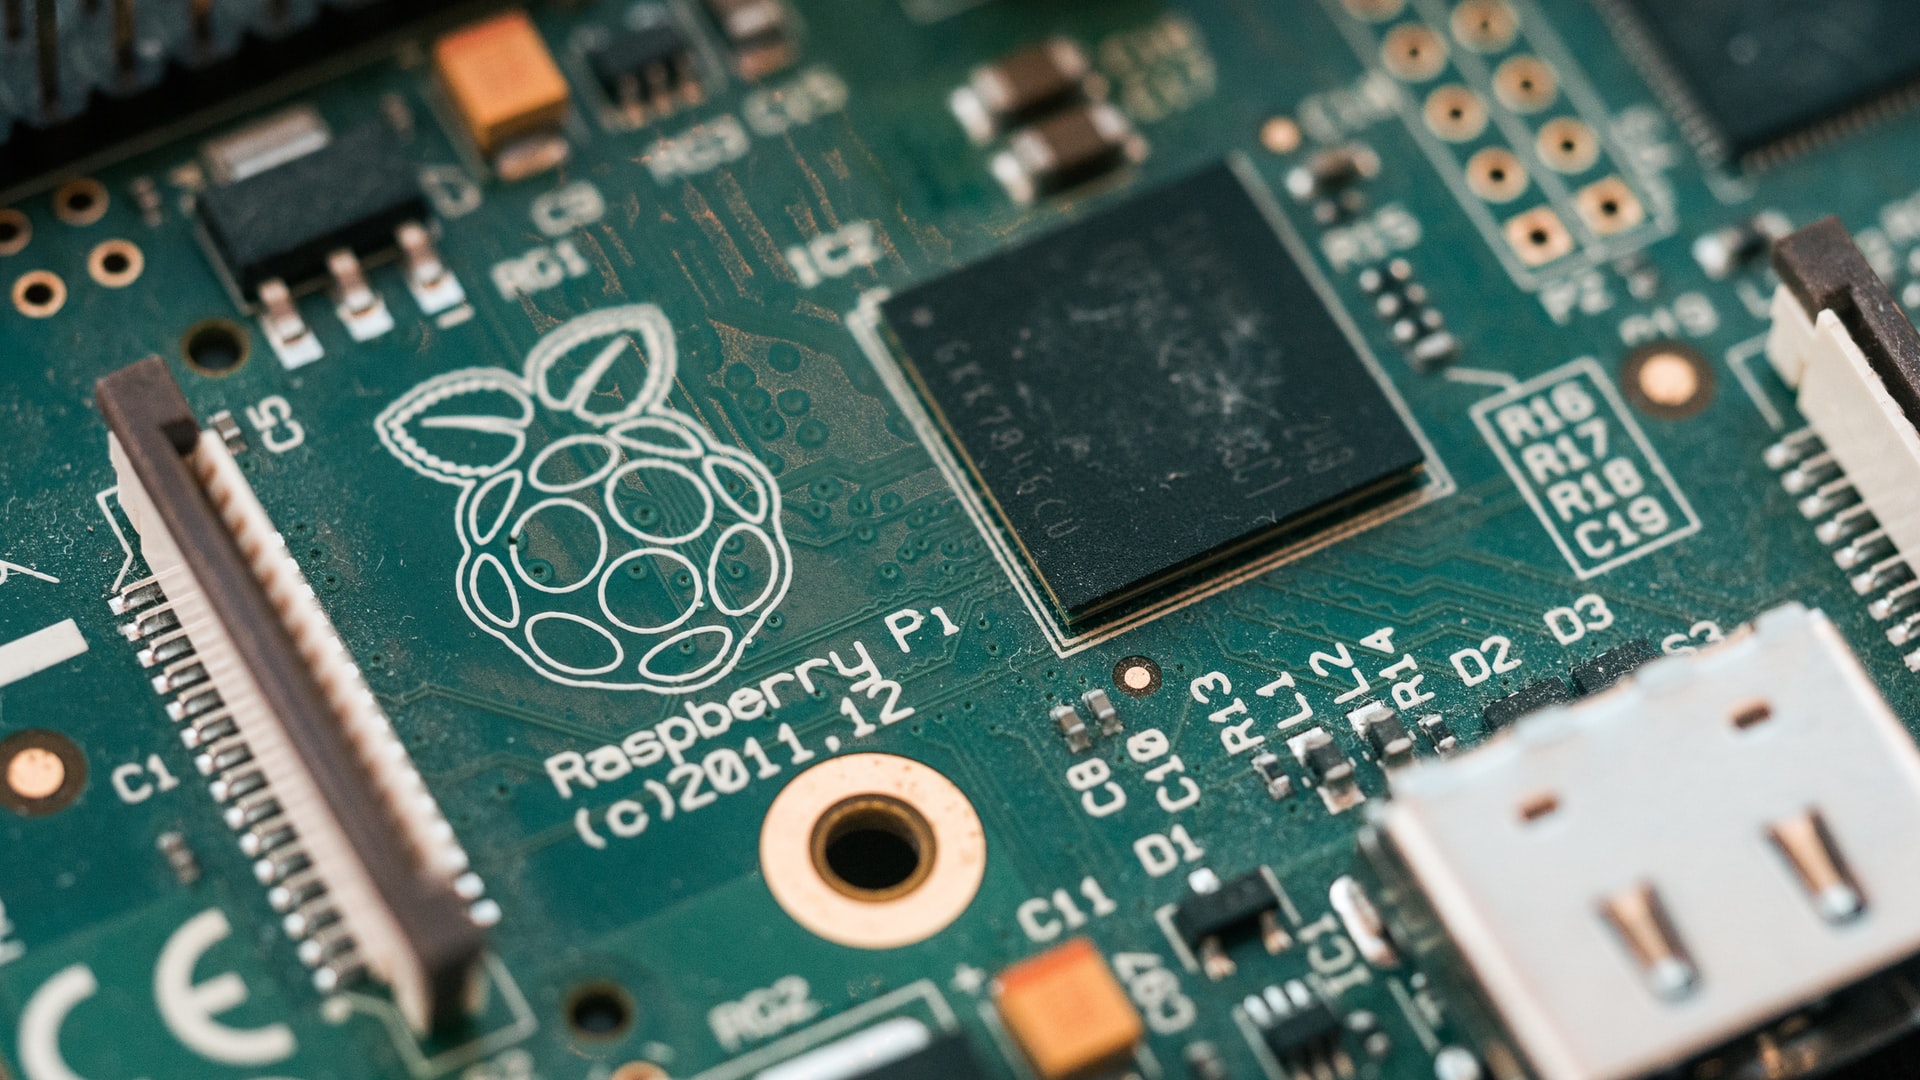 Raspberry Pi: Product review by a Product Manager